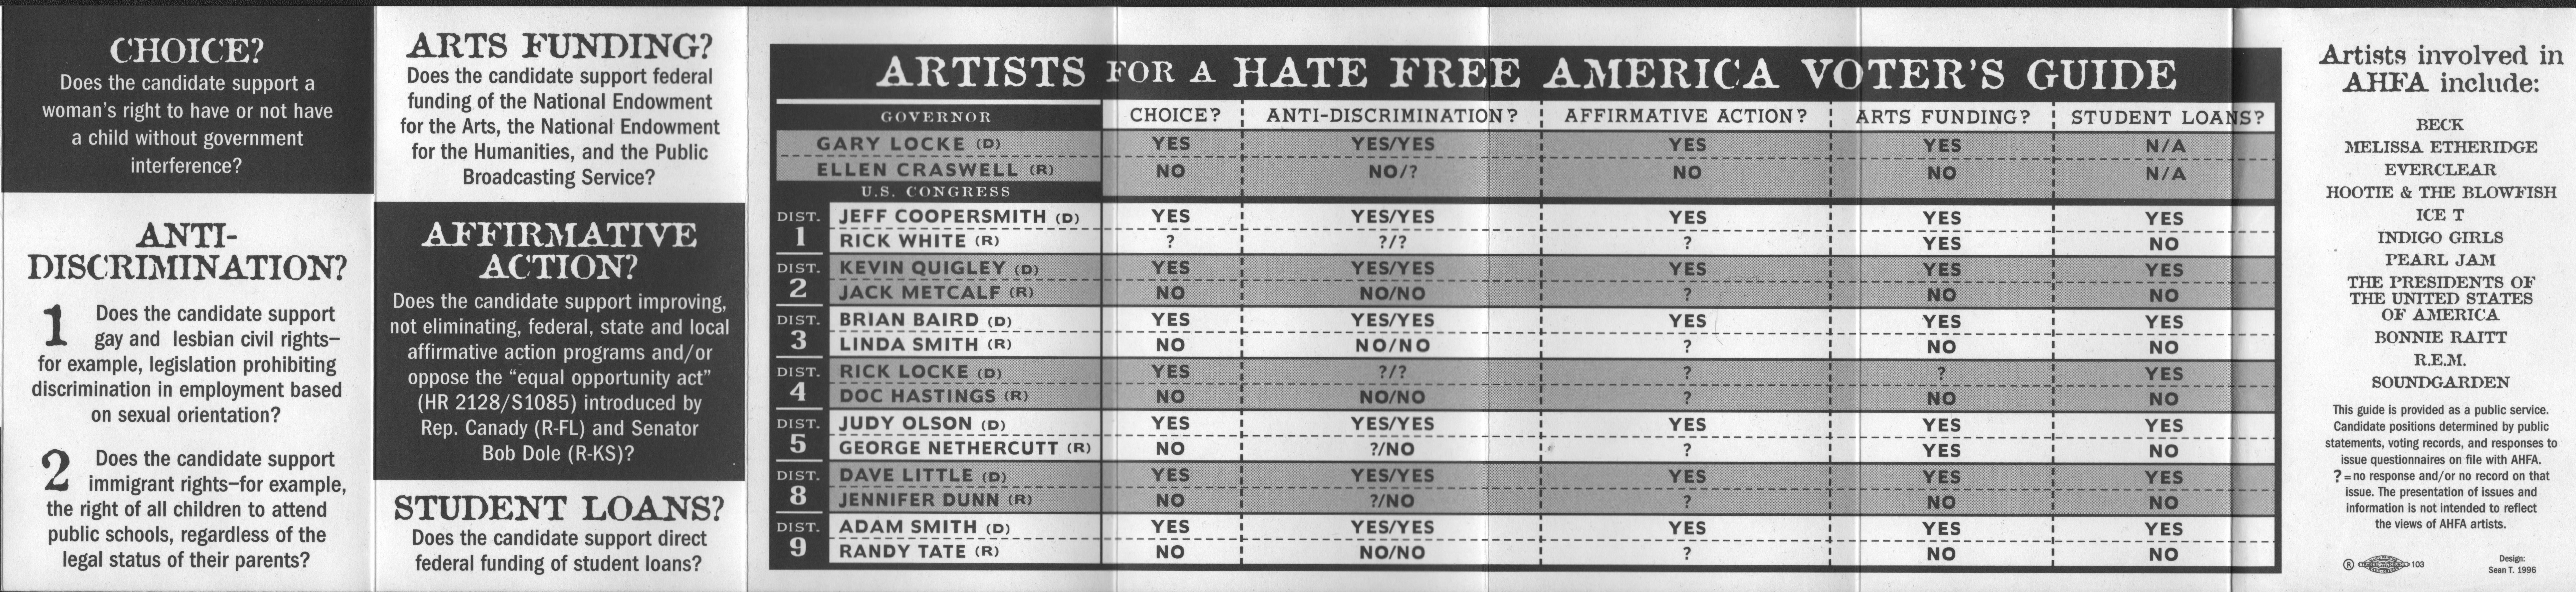 Artists for a Hate Free America brochure